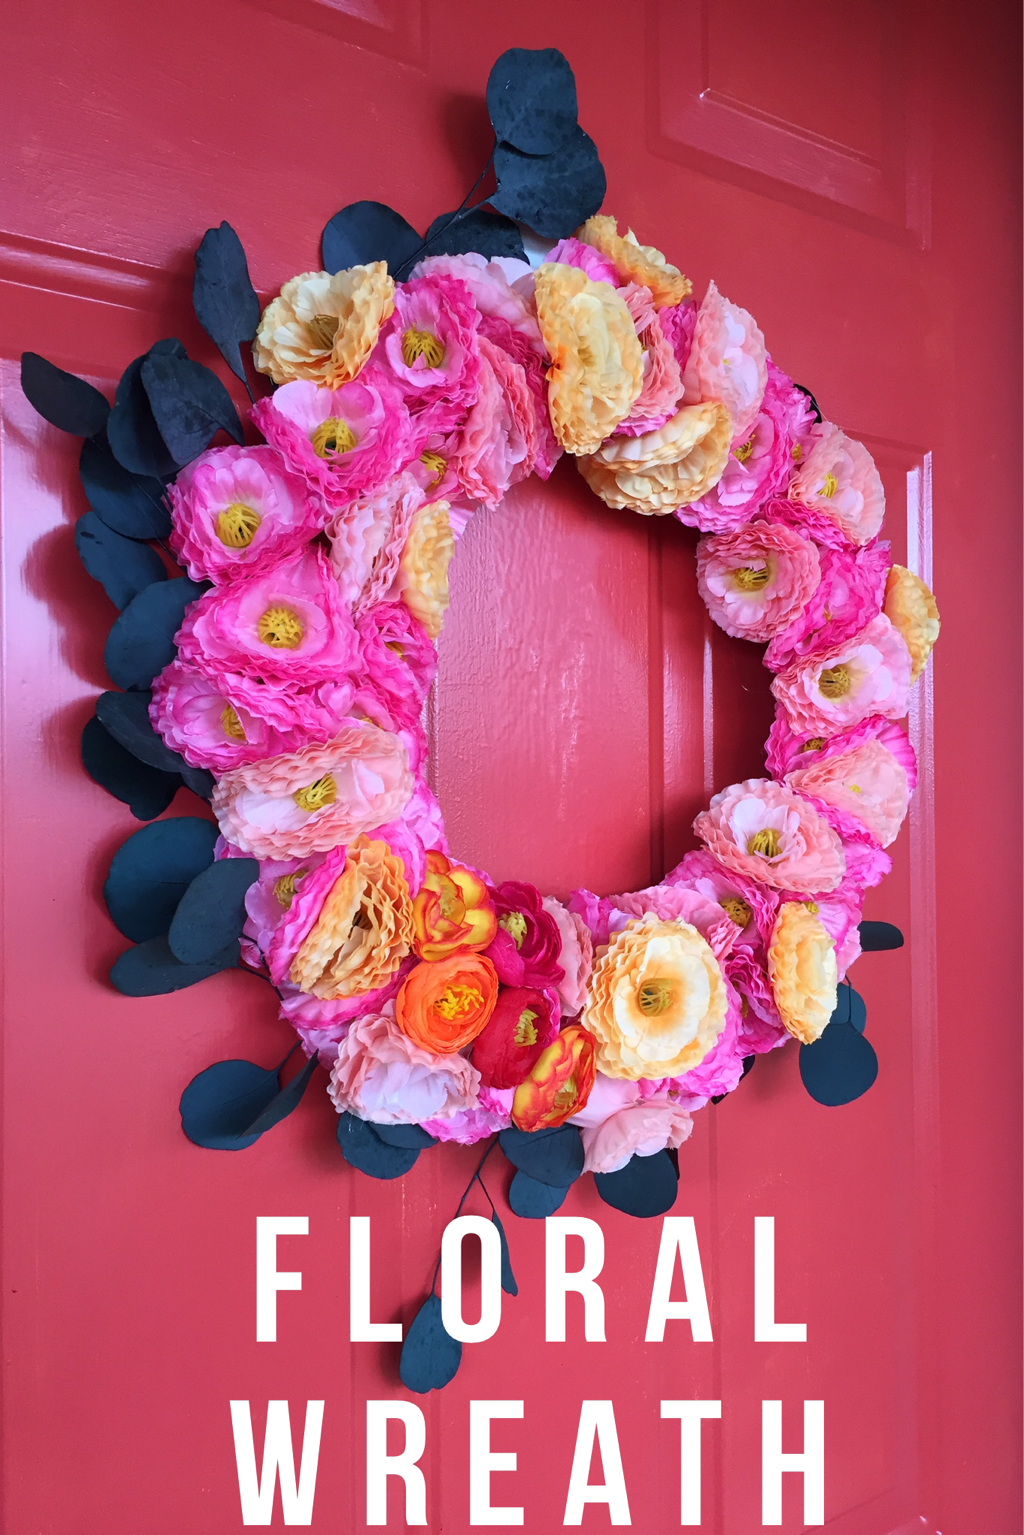 A simple DIY for a quick floral wreath.